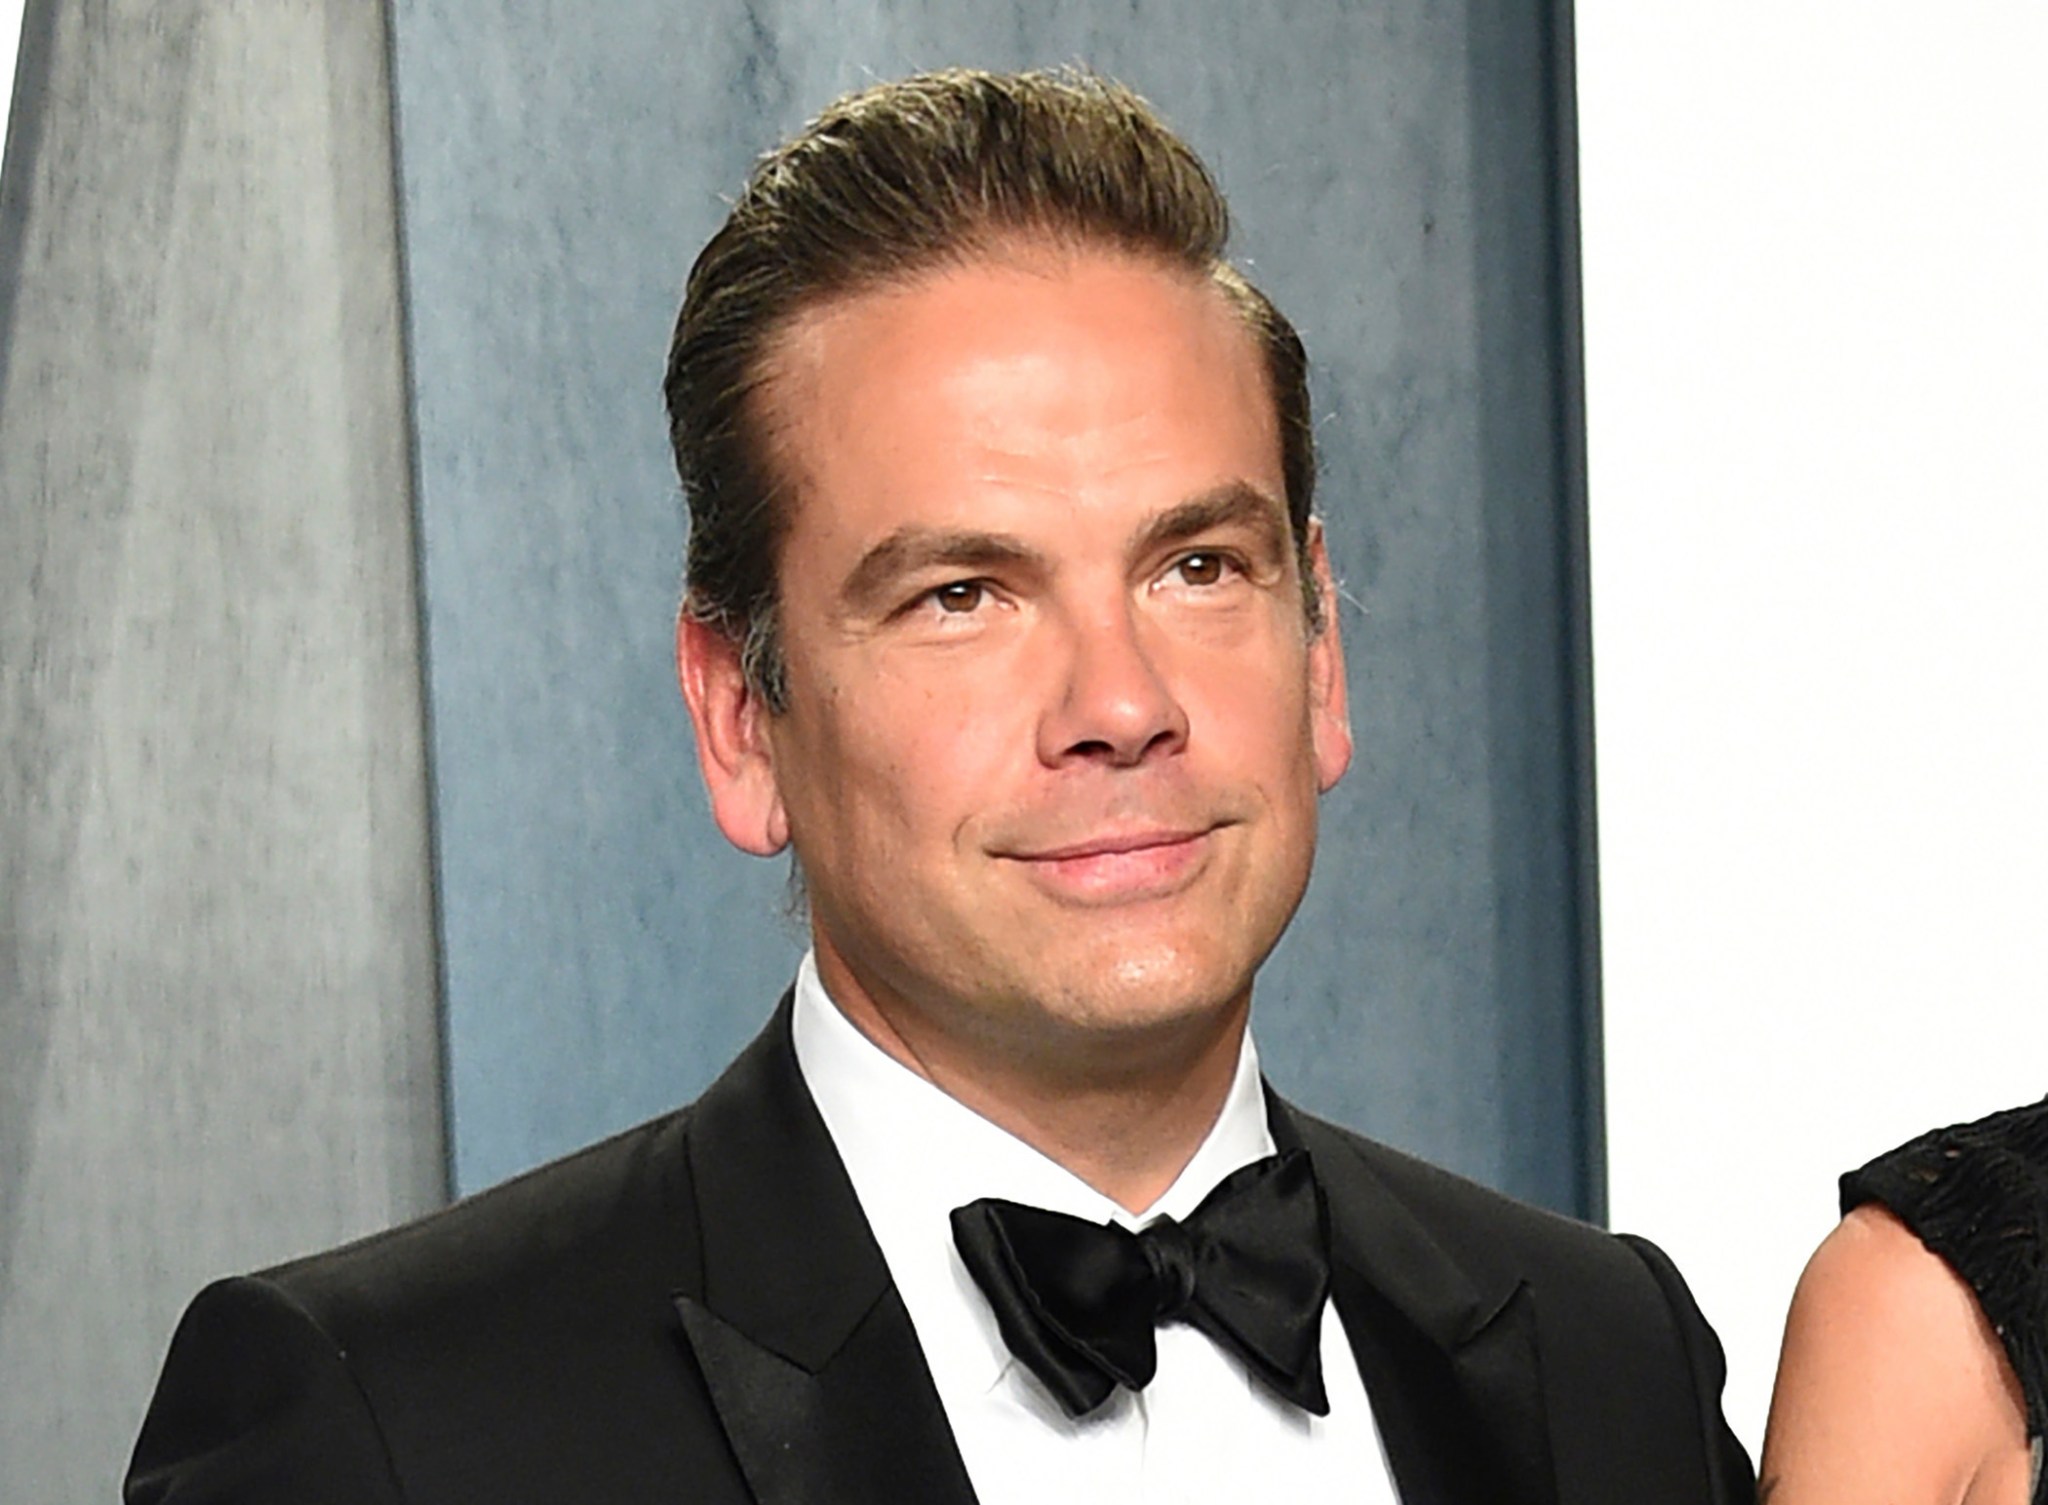 Who is Lachlan Murdoch? Rupert Murdoch’s oldest son and new head of Fox and News Corp.